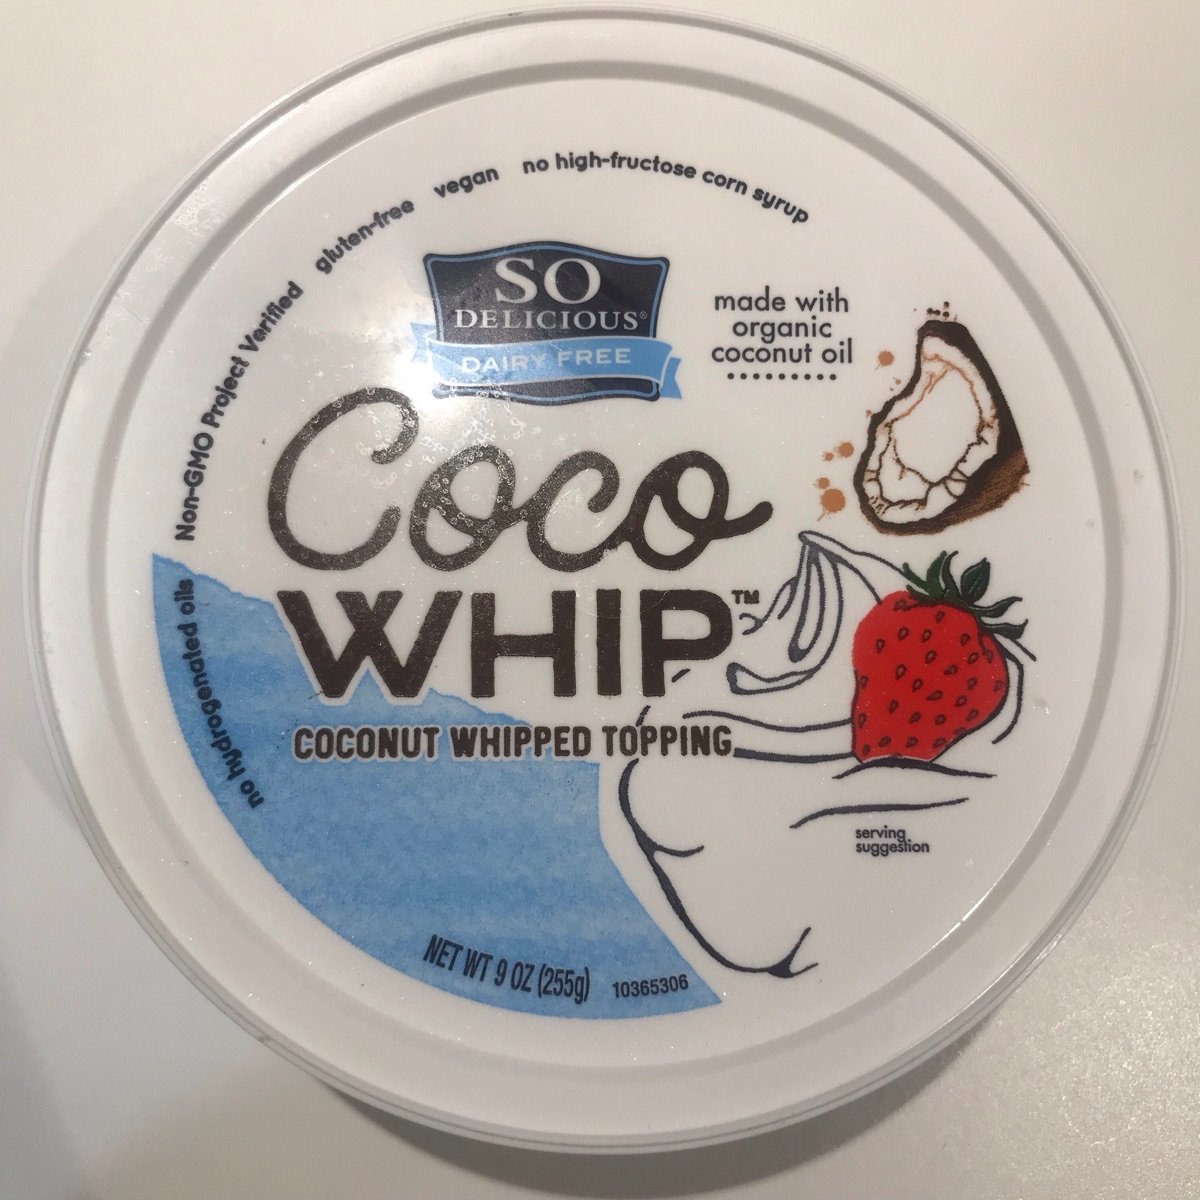 So Delicious Dairy Free Coco Whip Reviews | abillion